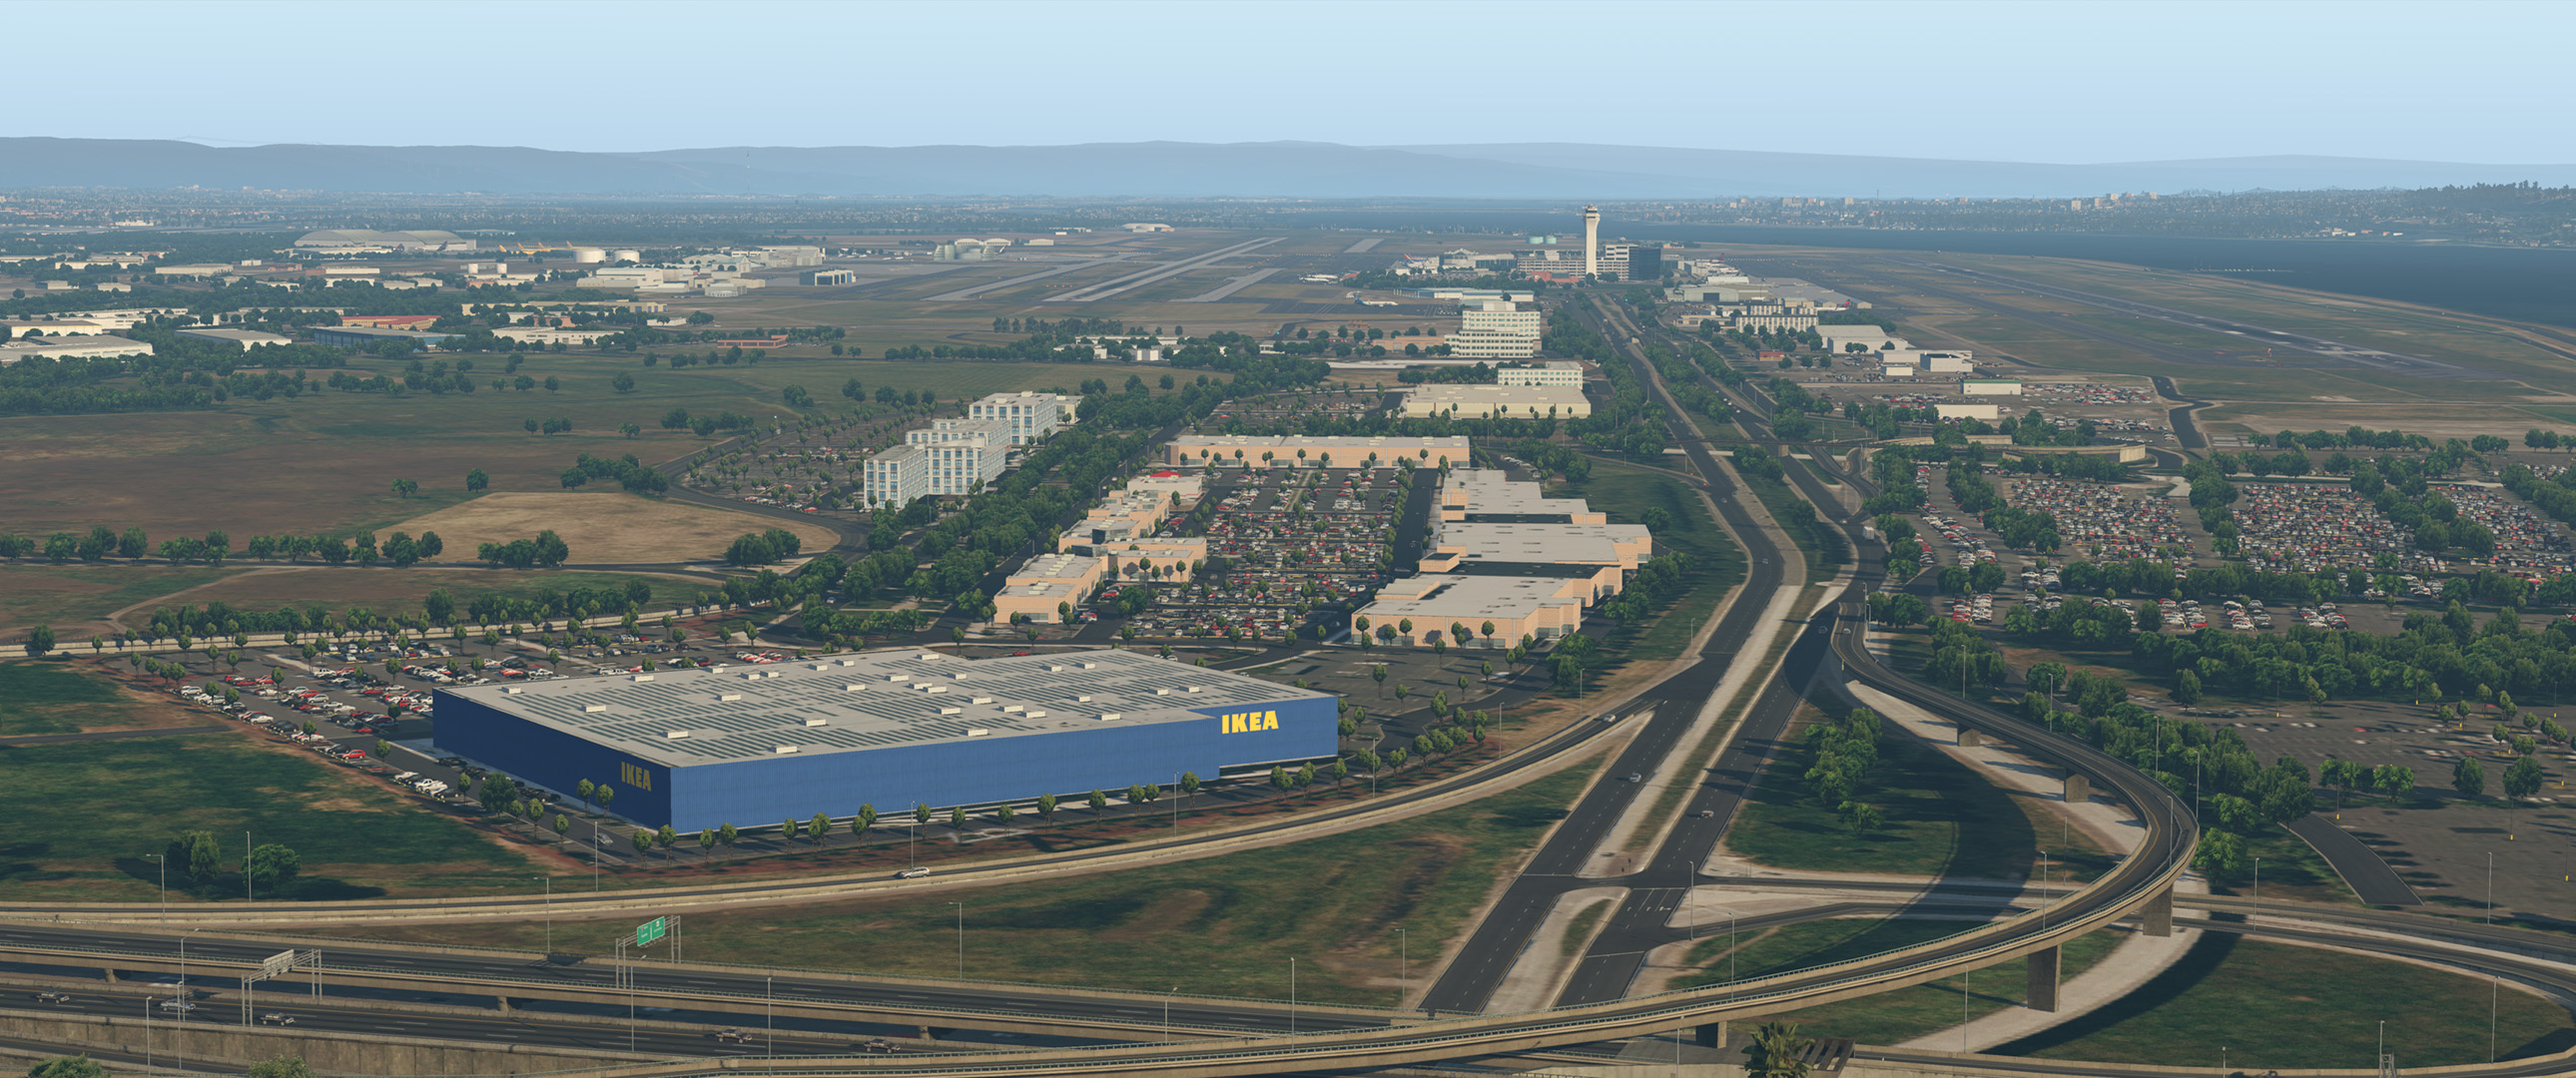 Best Freeware Sceneries for X-Plane 11 image 90